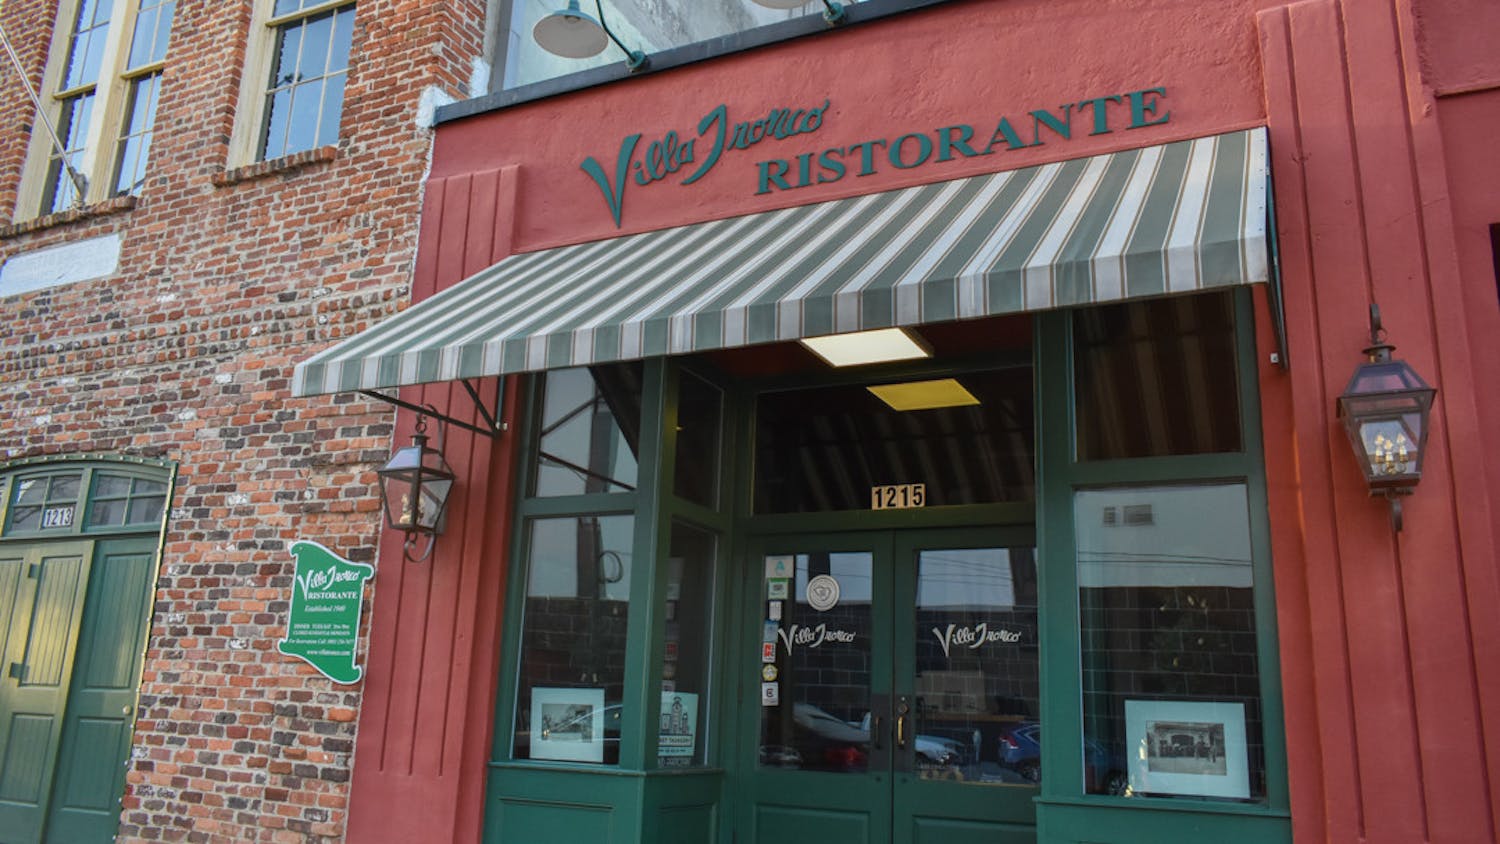 Villa Tronco Italian Restaurant, which opened over 80 years ago, is located in Downtown Columbia, S.C. The Tronco family has owned the restaurant for generations, making it a family establishment.